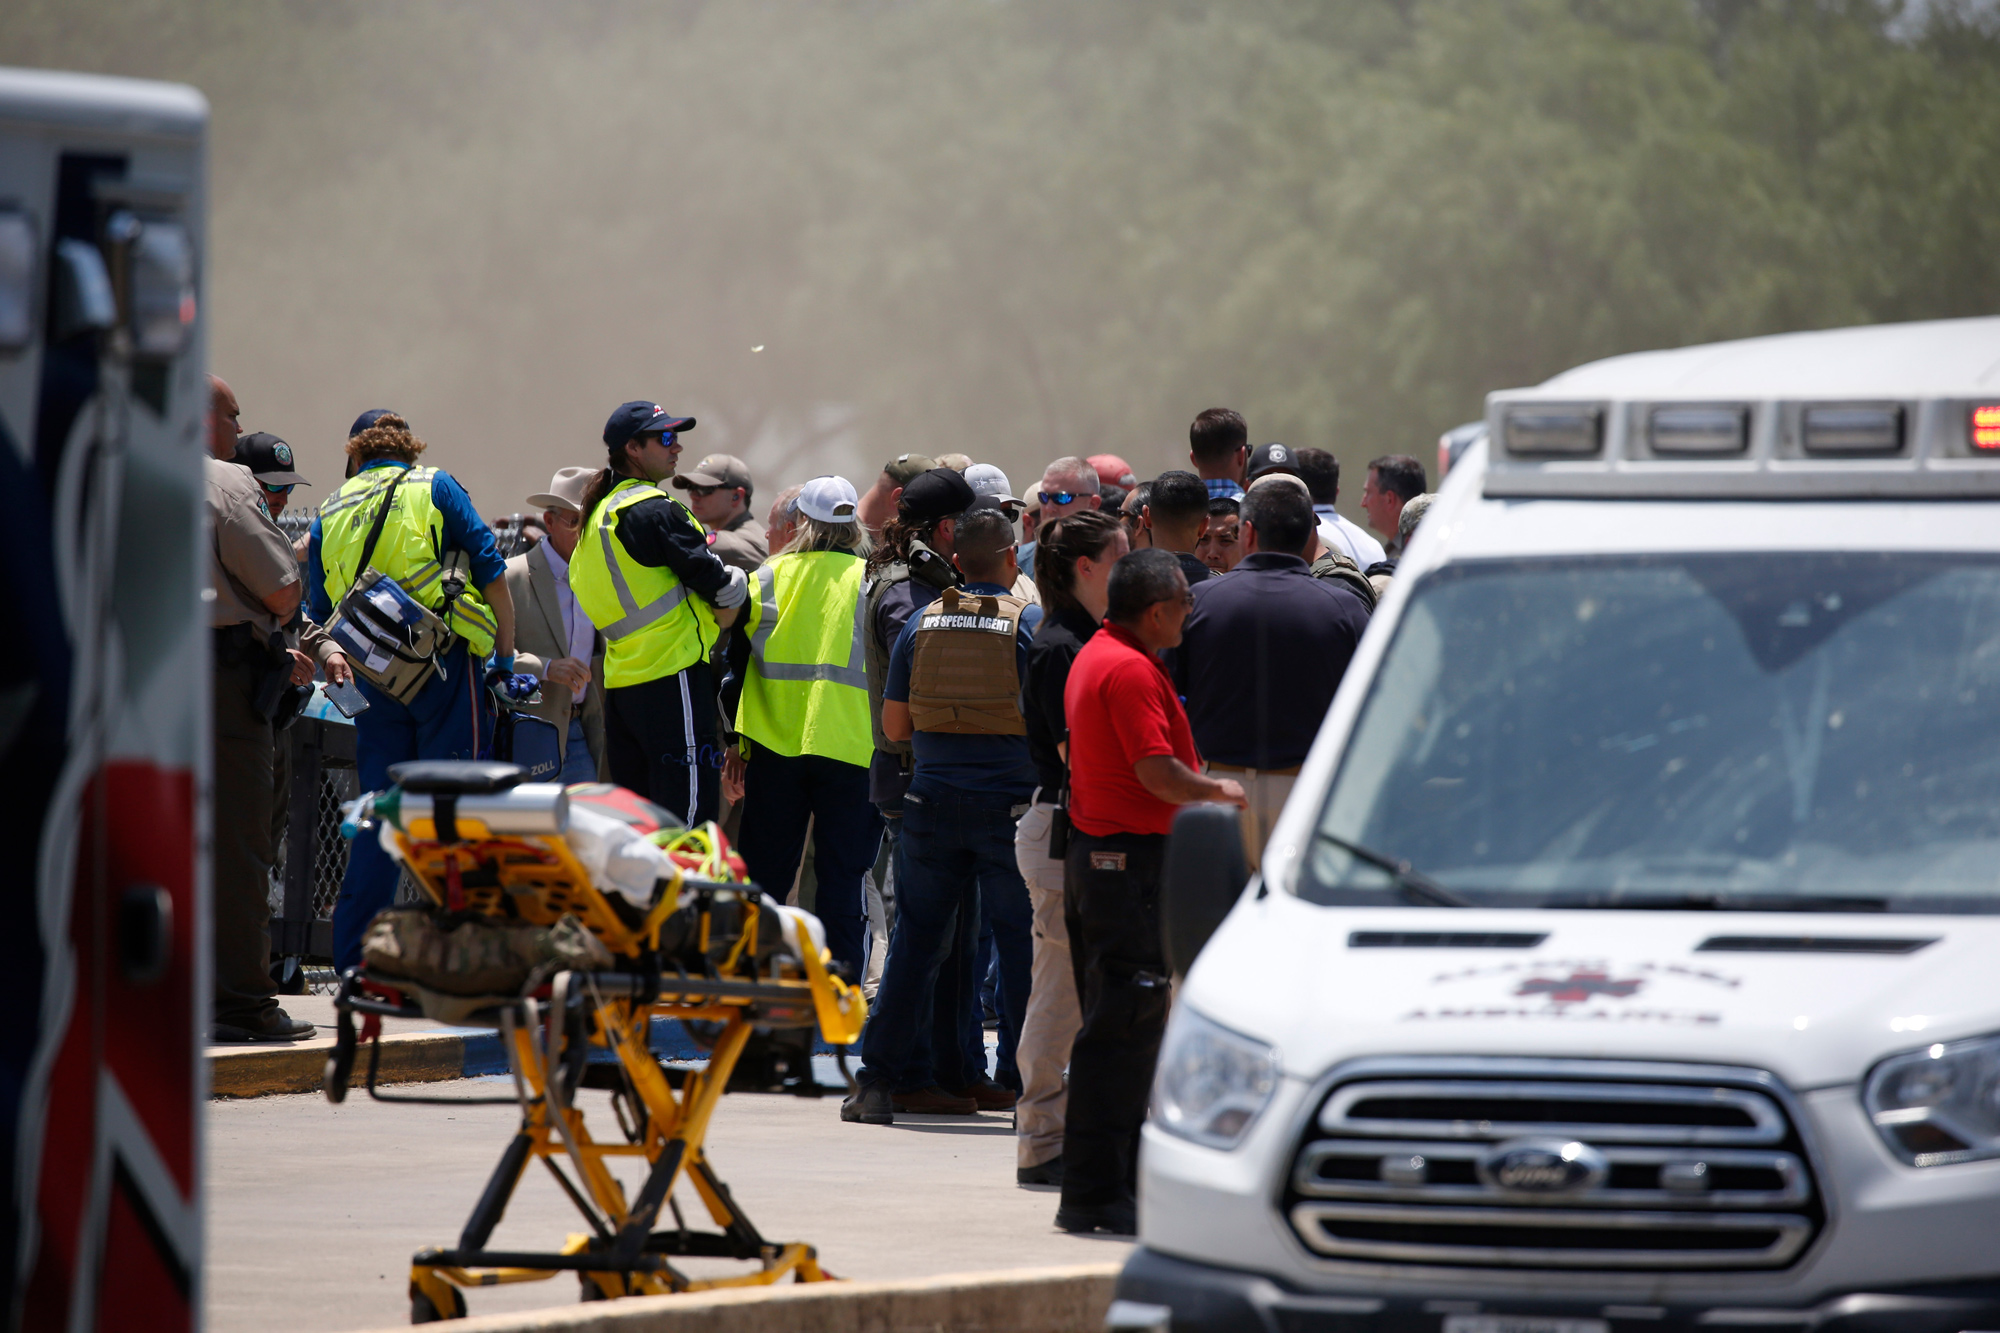 Emergency personnel gathered outside Robb Elementary School on May 24&nbsp;in Uvalde, Texas. Parents of children in the school said they pleaded with police to confront the gunman, but police delayed for an hour and 18 minutes and kept parents from going in themselves. One official reportedly said the delay was to avoid injury to police. Nineteen children and two teachers were shot dead.